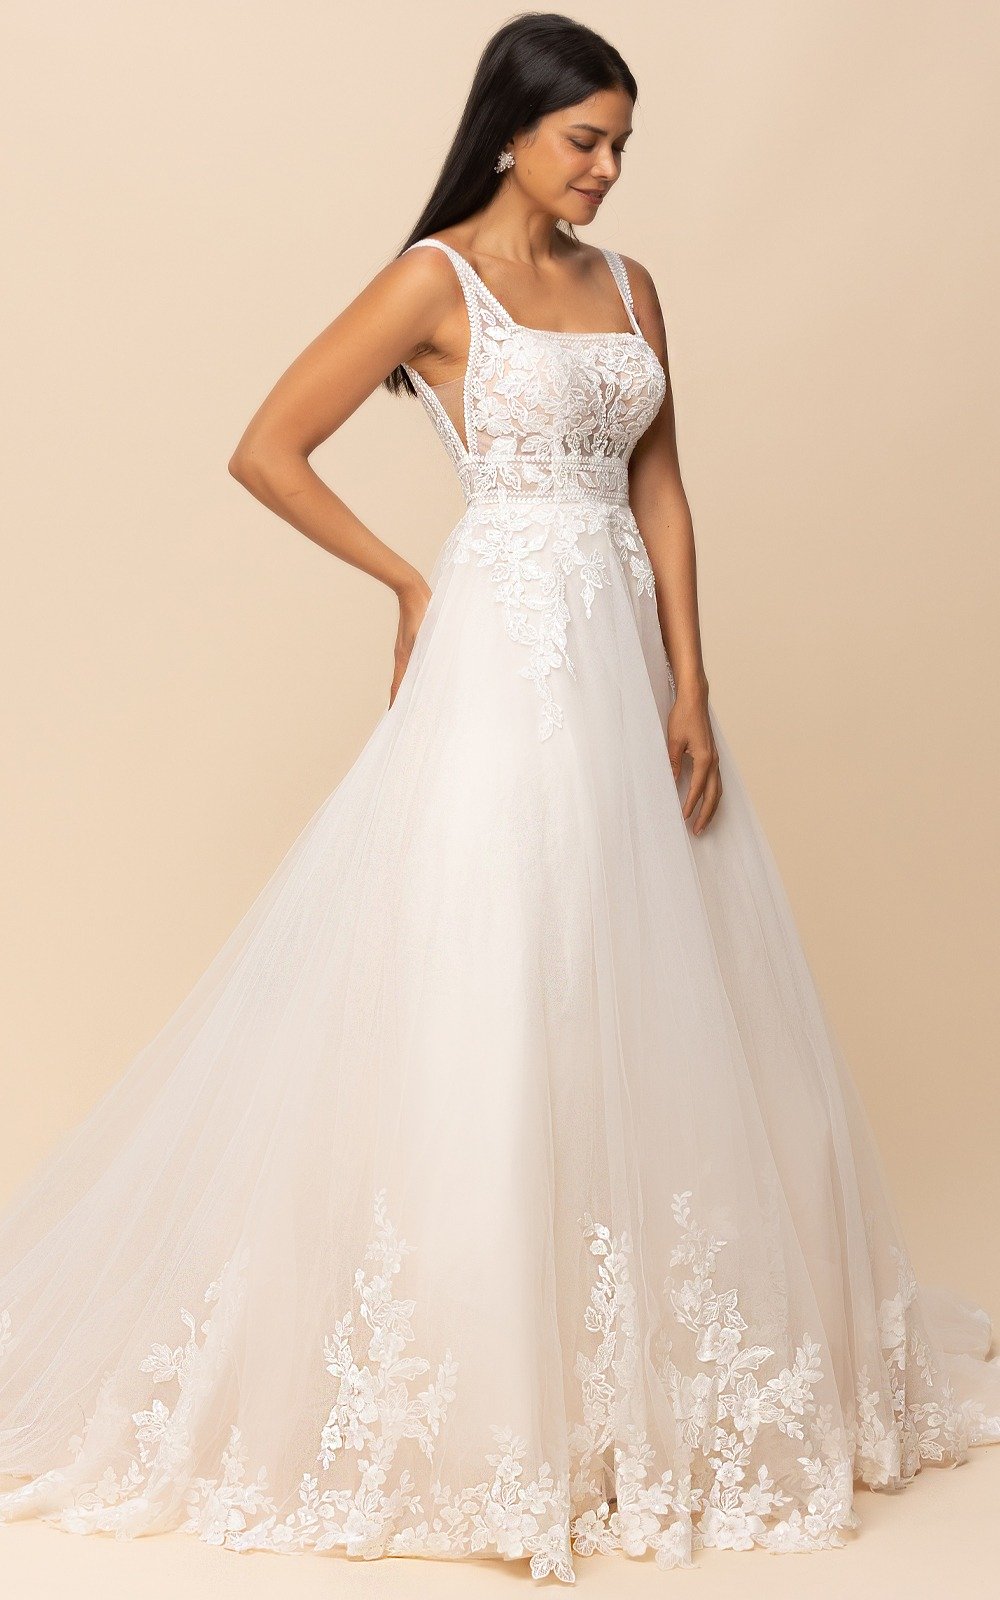 The Petula an affordable wedding gown from Afarose